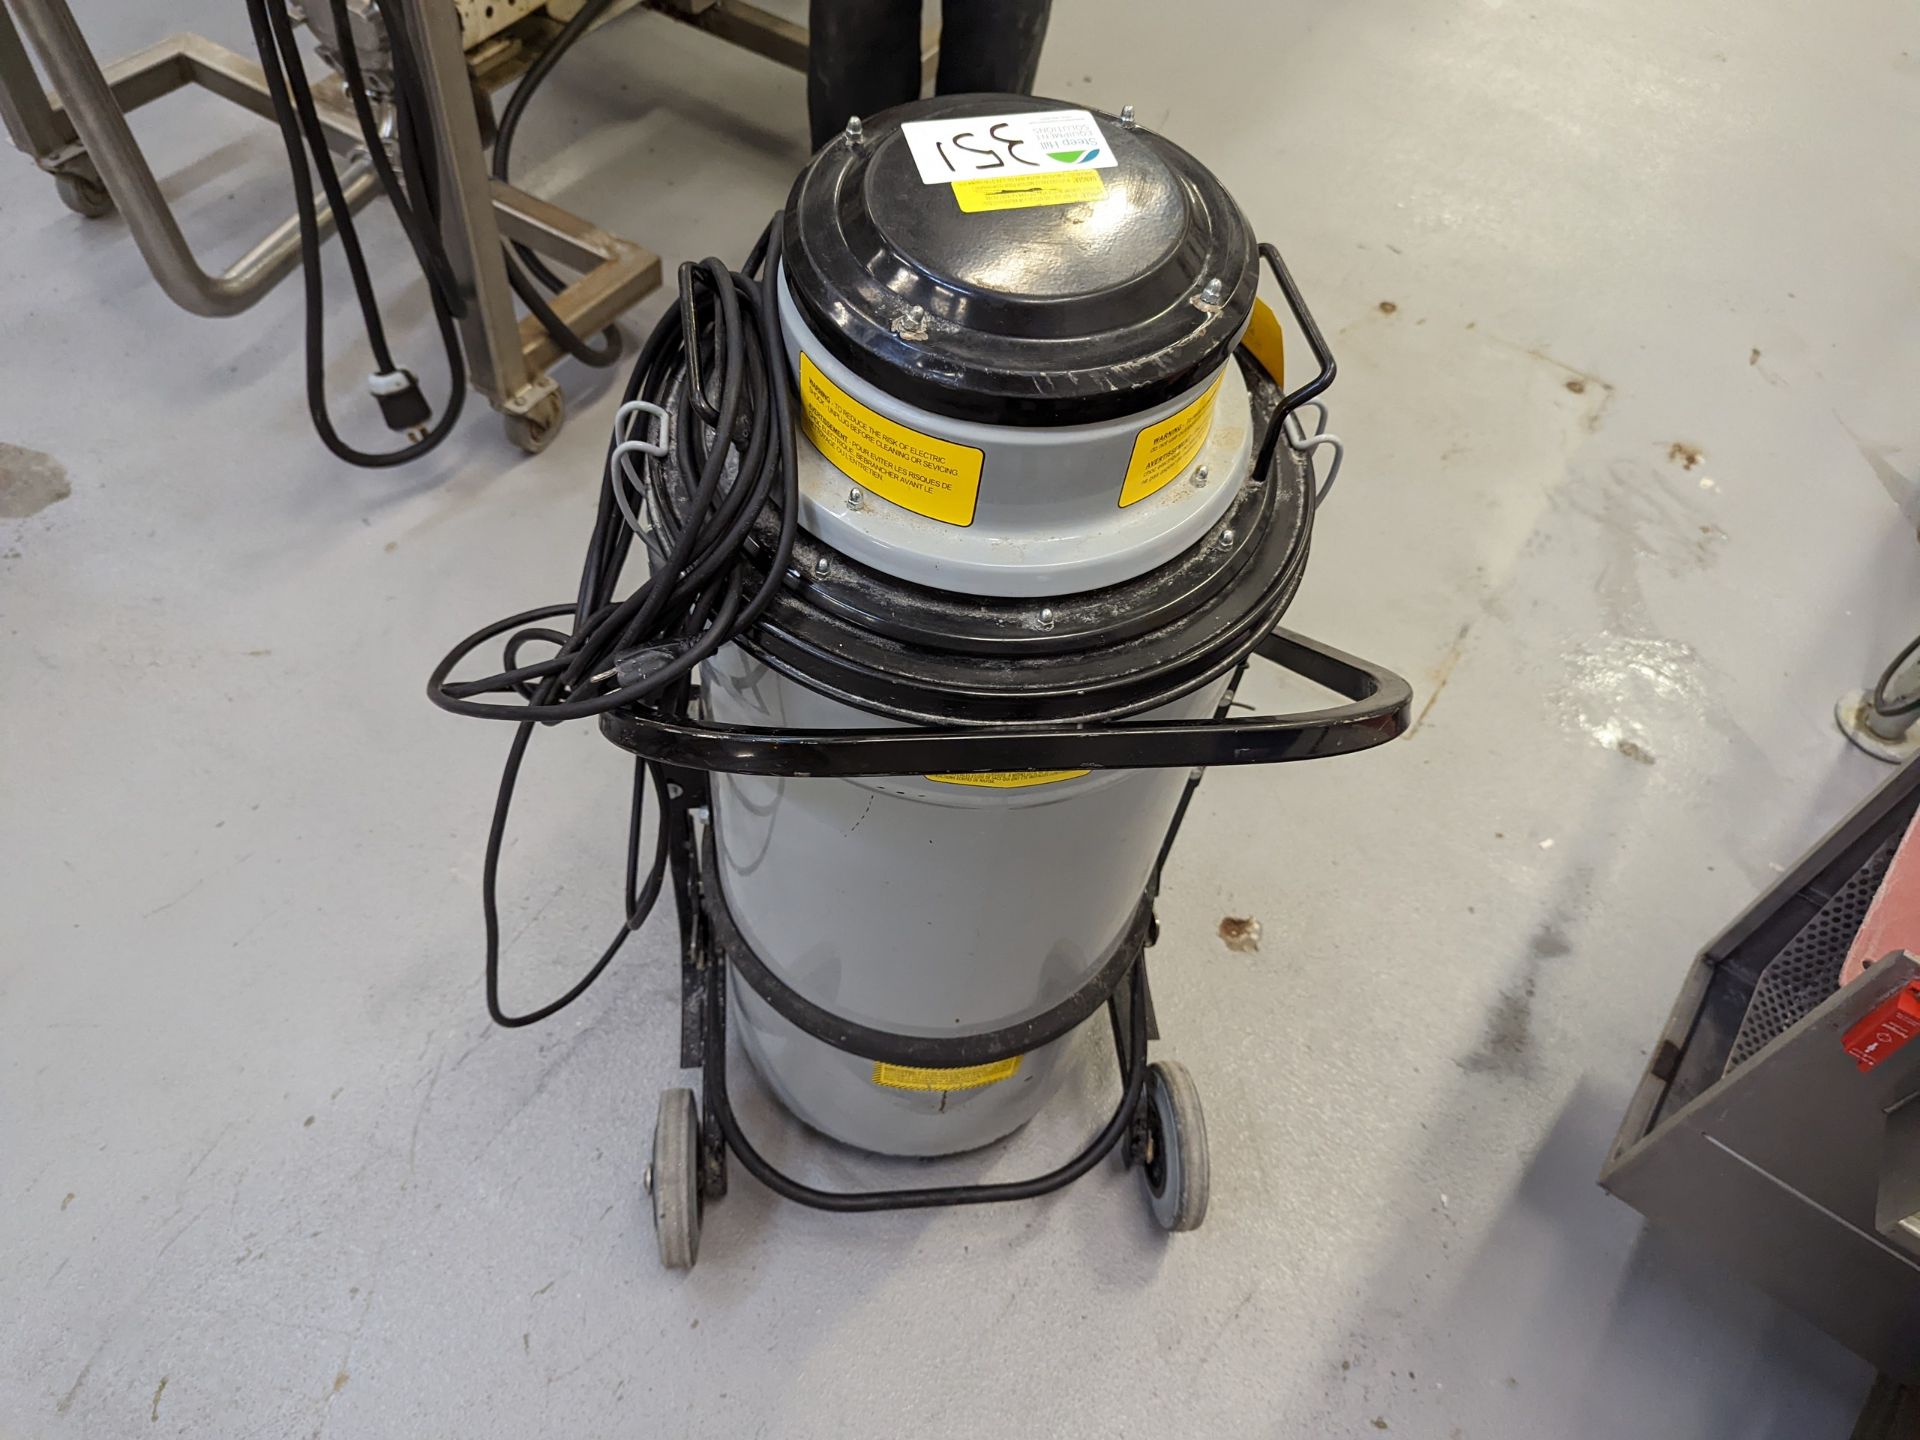 Nilfisk Model 118 Portable Dust Collector - Image 5 of 7